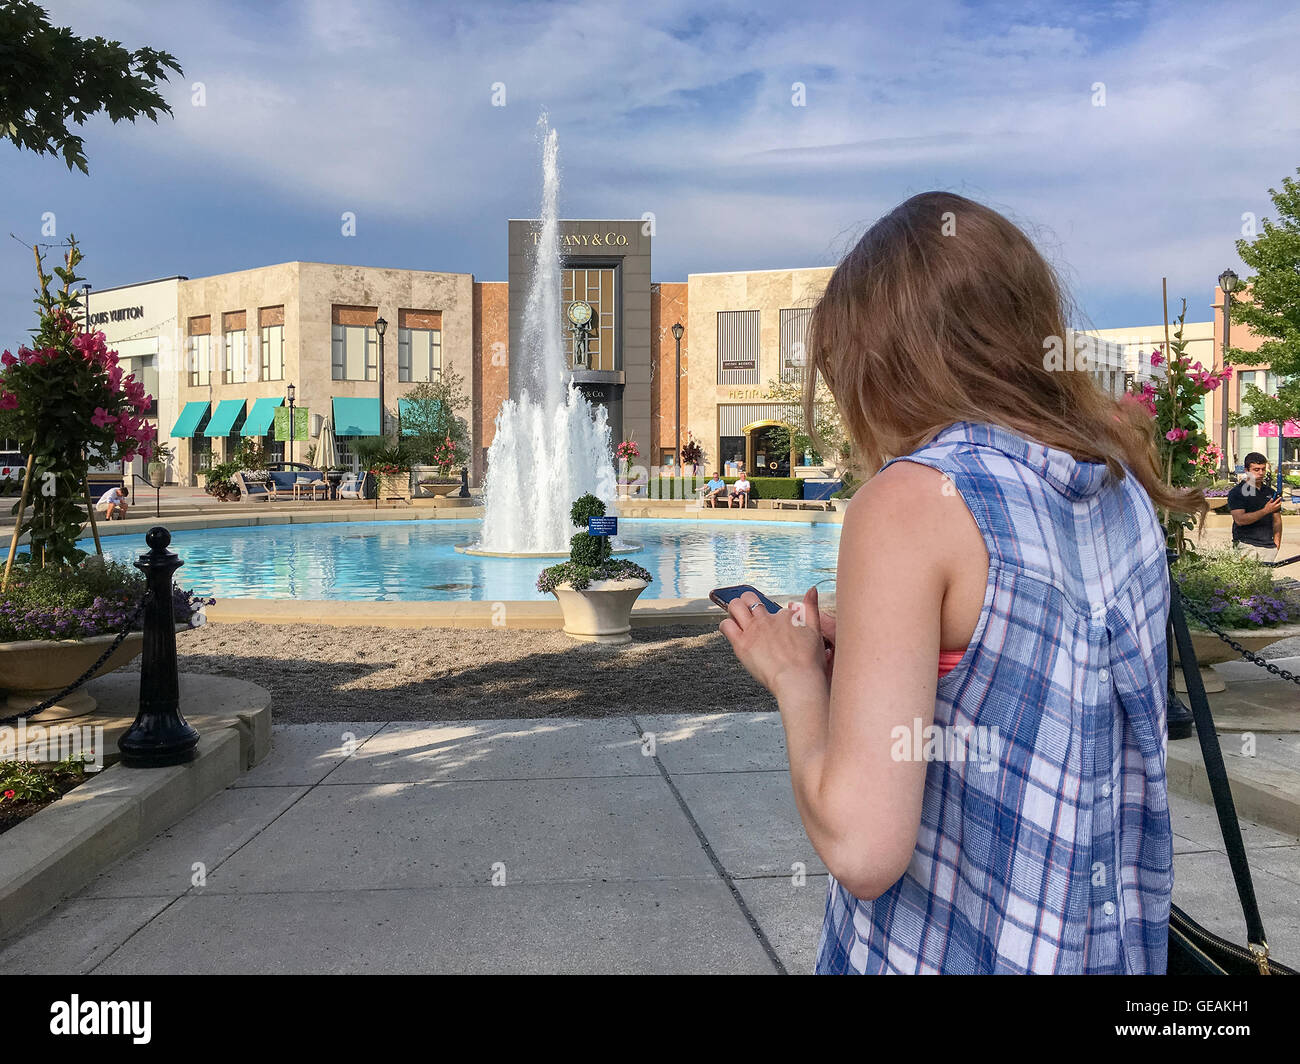 Columbus, Ohio, United States. 24th July, 2016. COLUMBUS, OHIO - JULY 24: A young woman catches a Pokemon, playing Pokemon Go at the the Easton Town Center mall on July 24, 2016. The location-based augmented reality mobile game by Niantic Labs launched in early July 2016. Credit:  2016 Marianne A. Campolongo/Alamy Live News Stock Photo